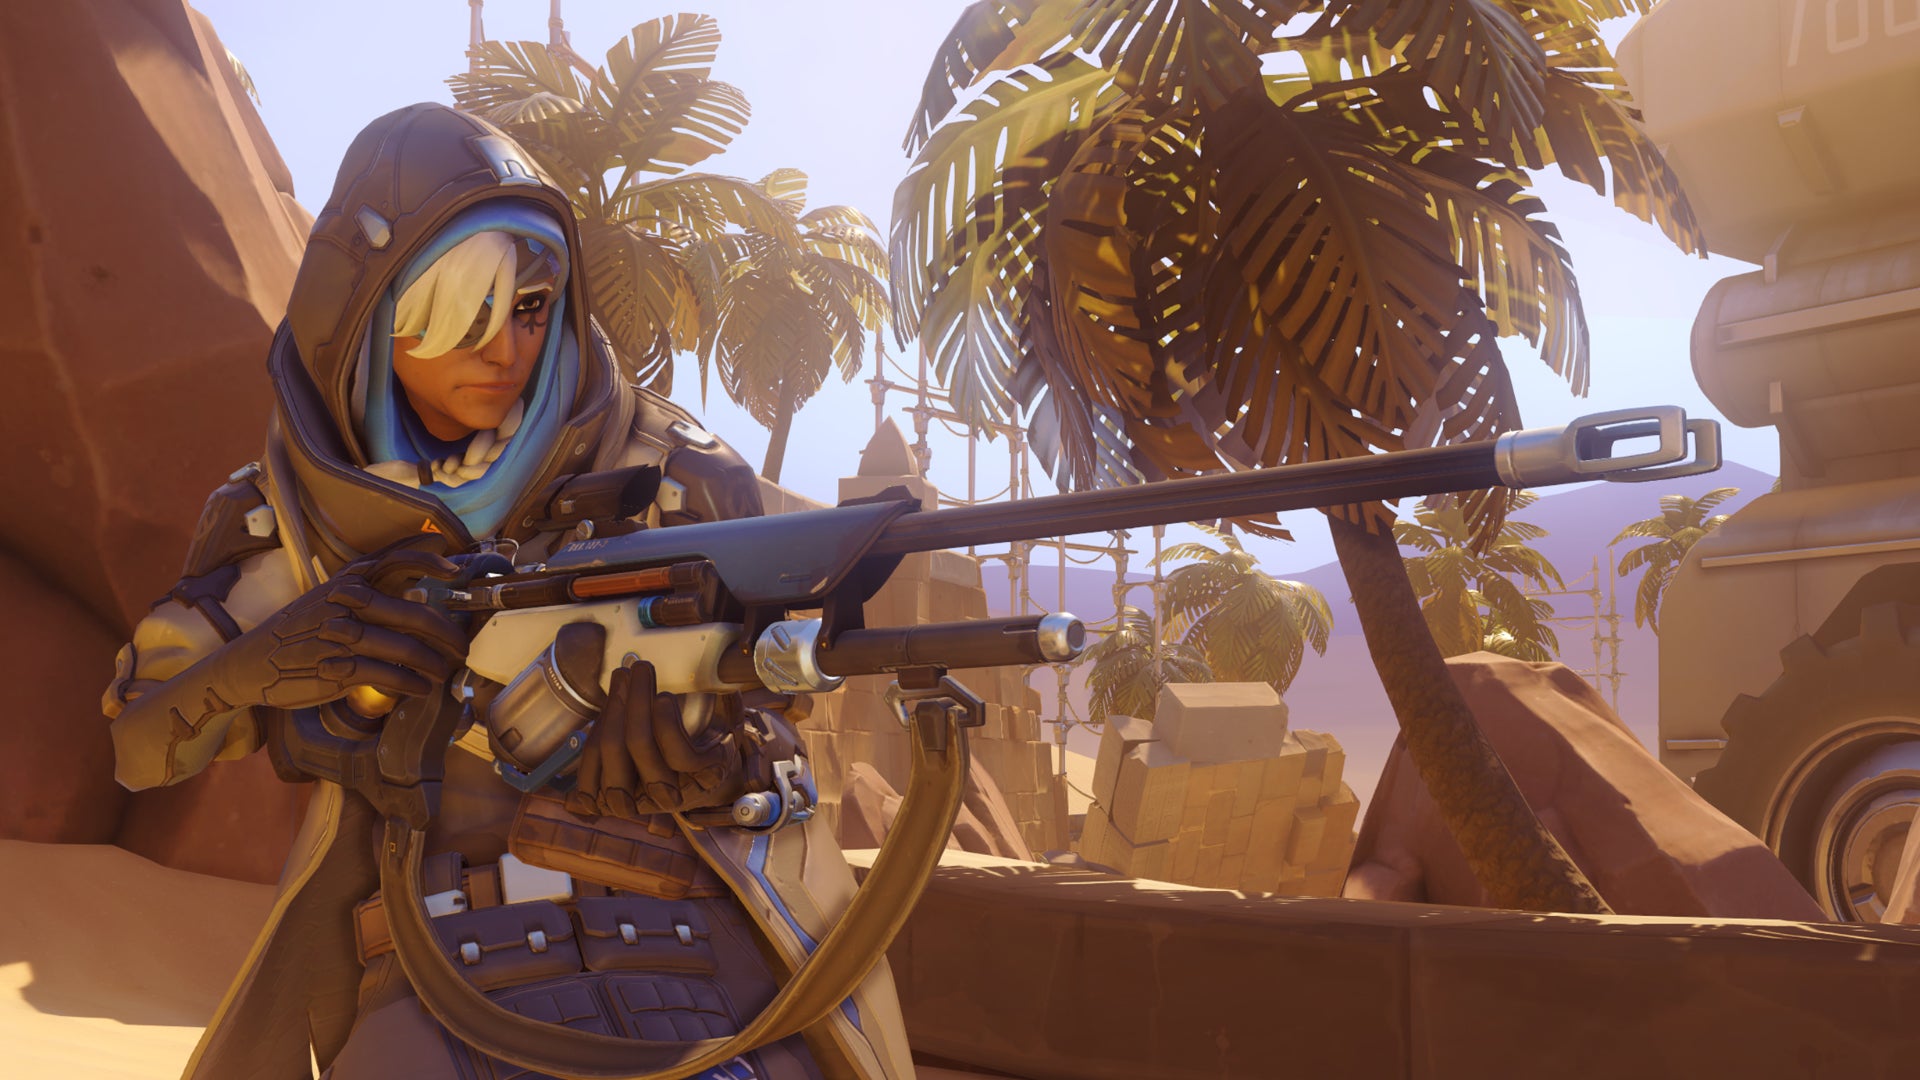 Ana, a hero in Overwatch 2, stands outside and aims with her sniper rifle to the right.